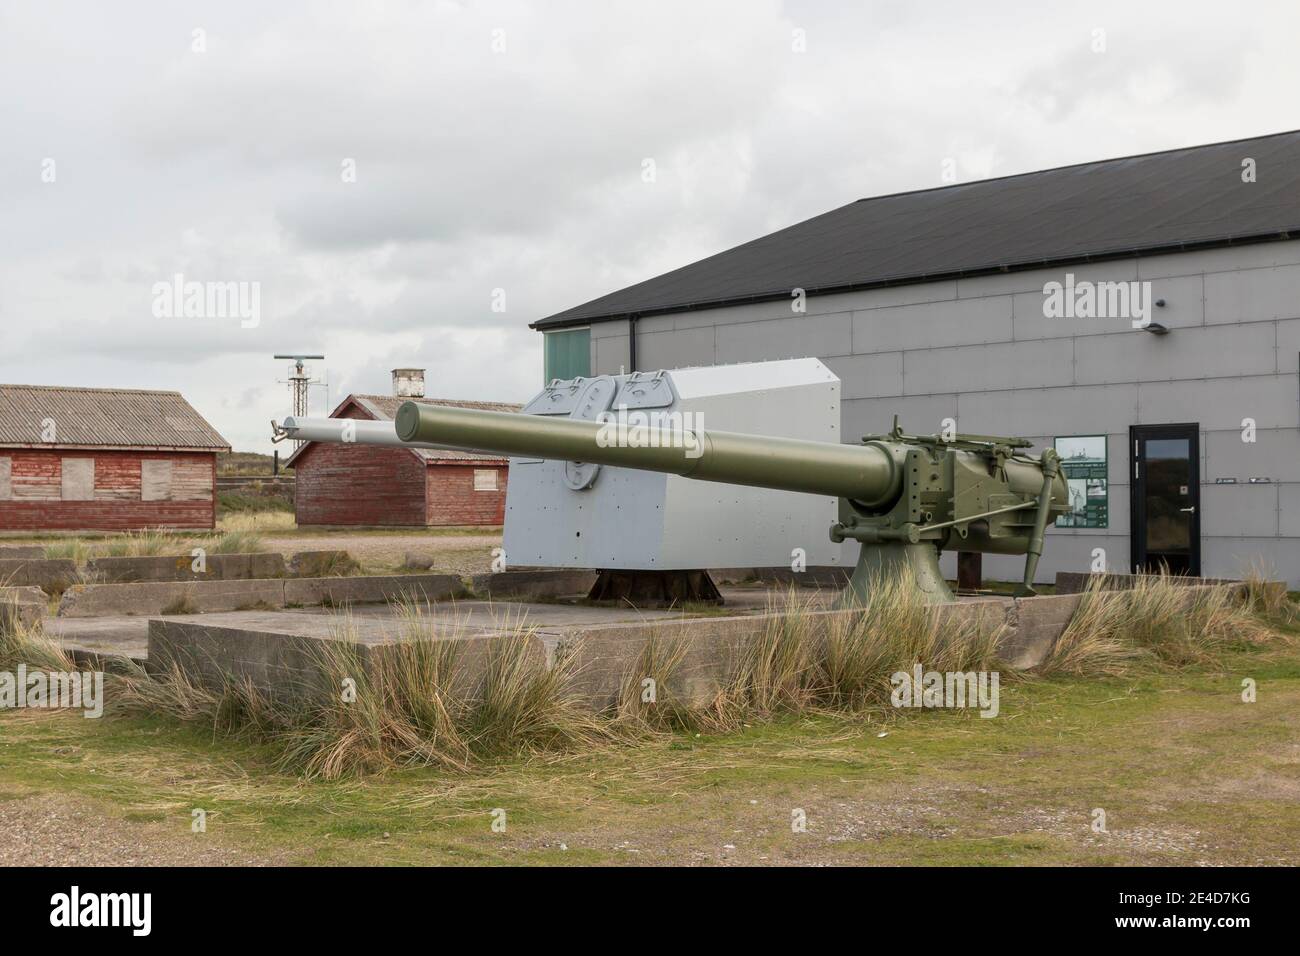 Thyboron, Denmark - 23 October 2020: Old German cannons that can be seen at the port of Thyboron, The cannons have been on German warships during Worl Stock Photo